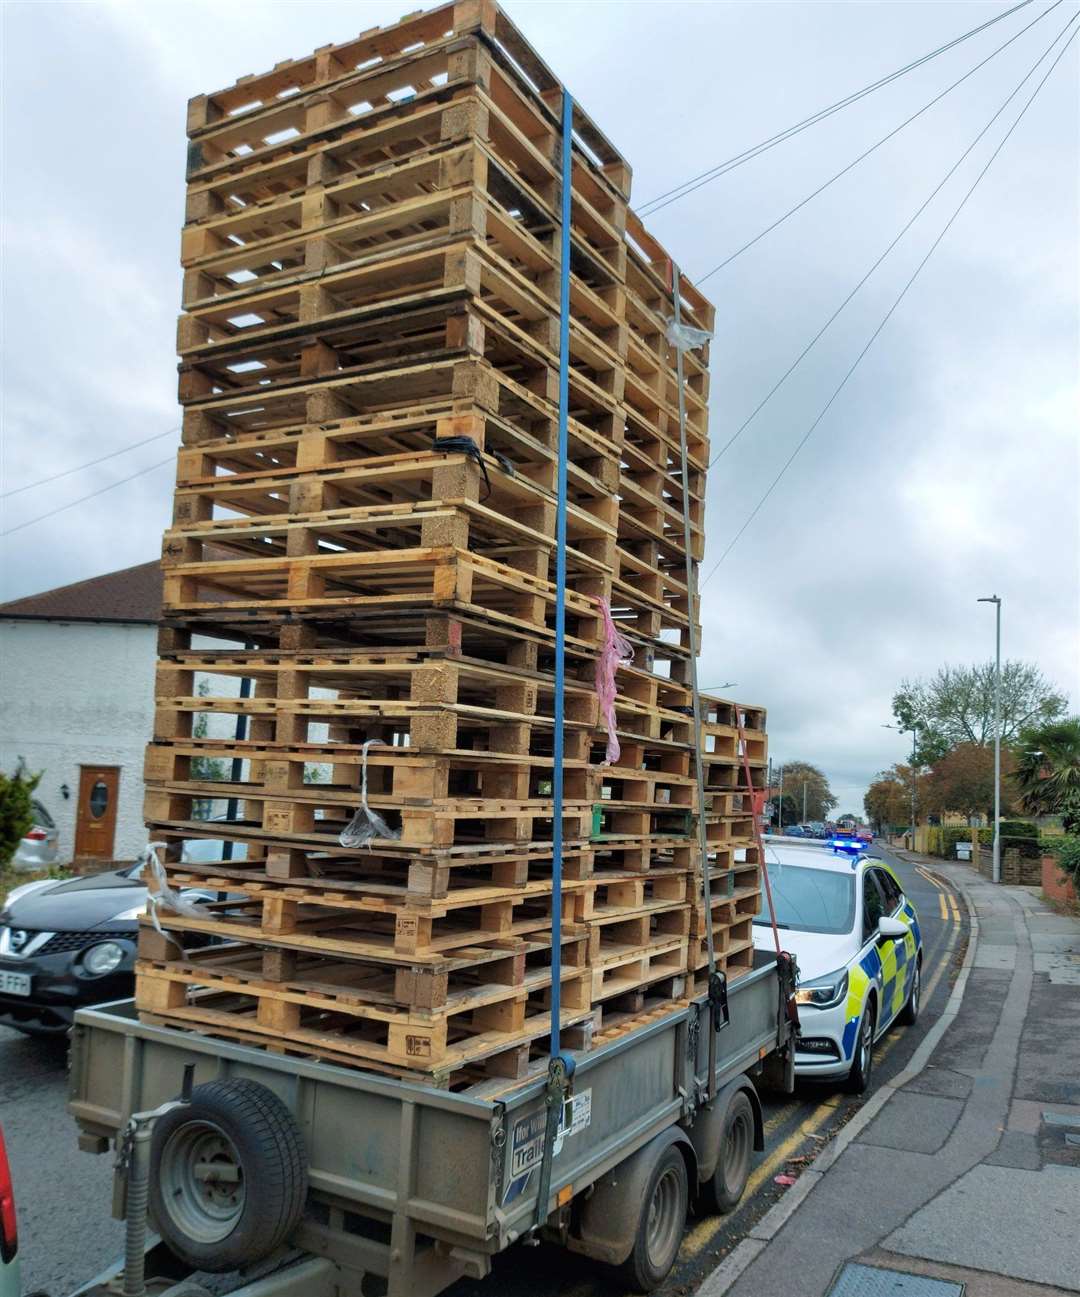 The pallets were stacked 20ft high. Picture: Kent Police Specials